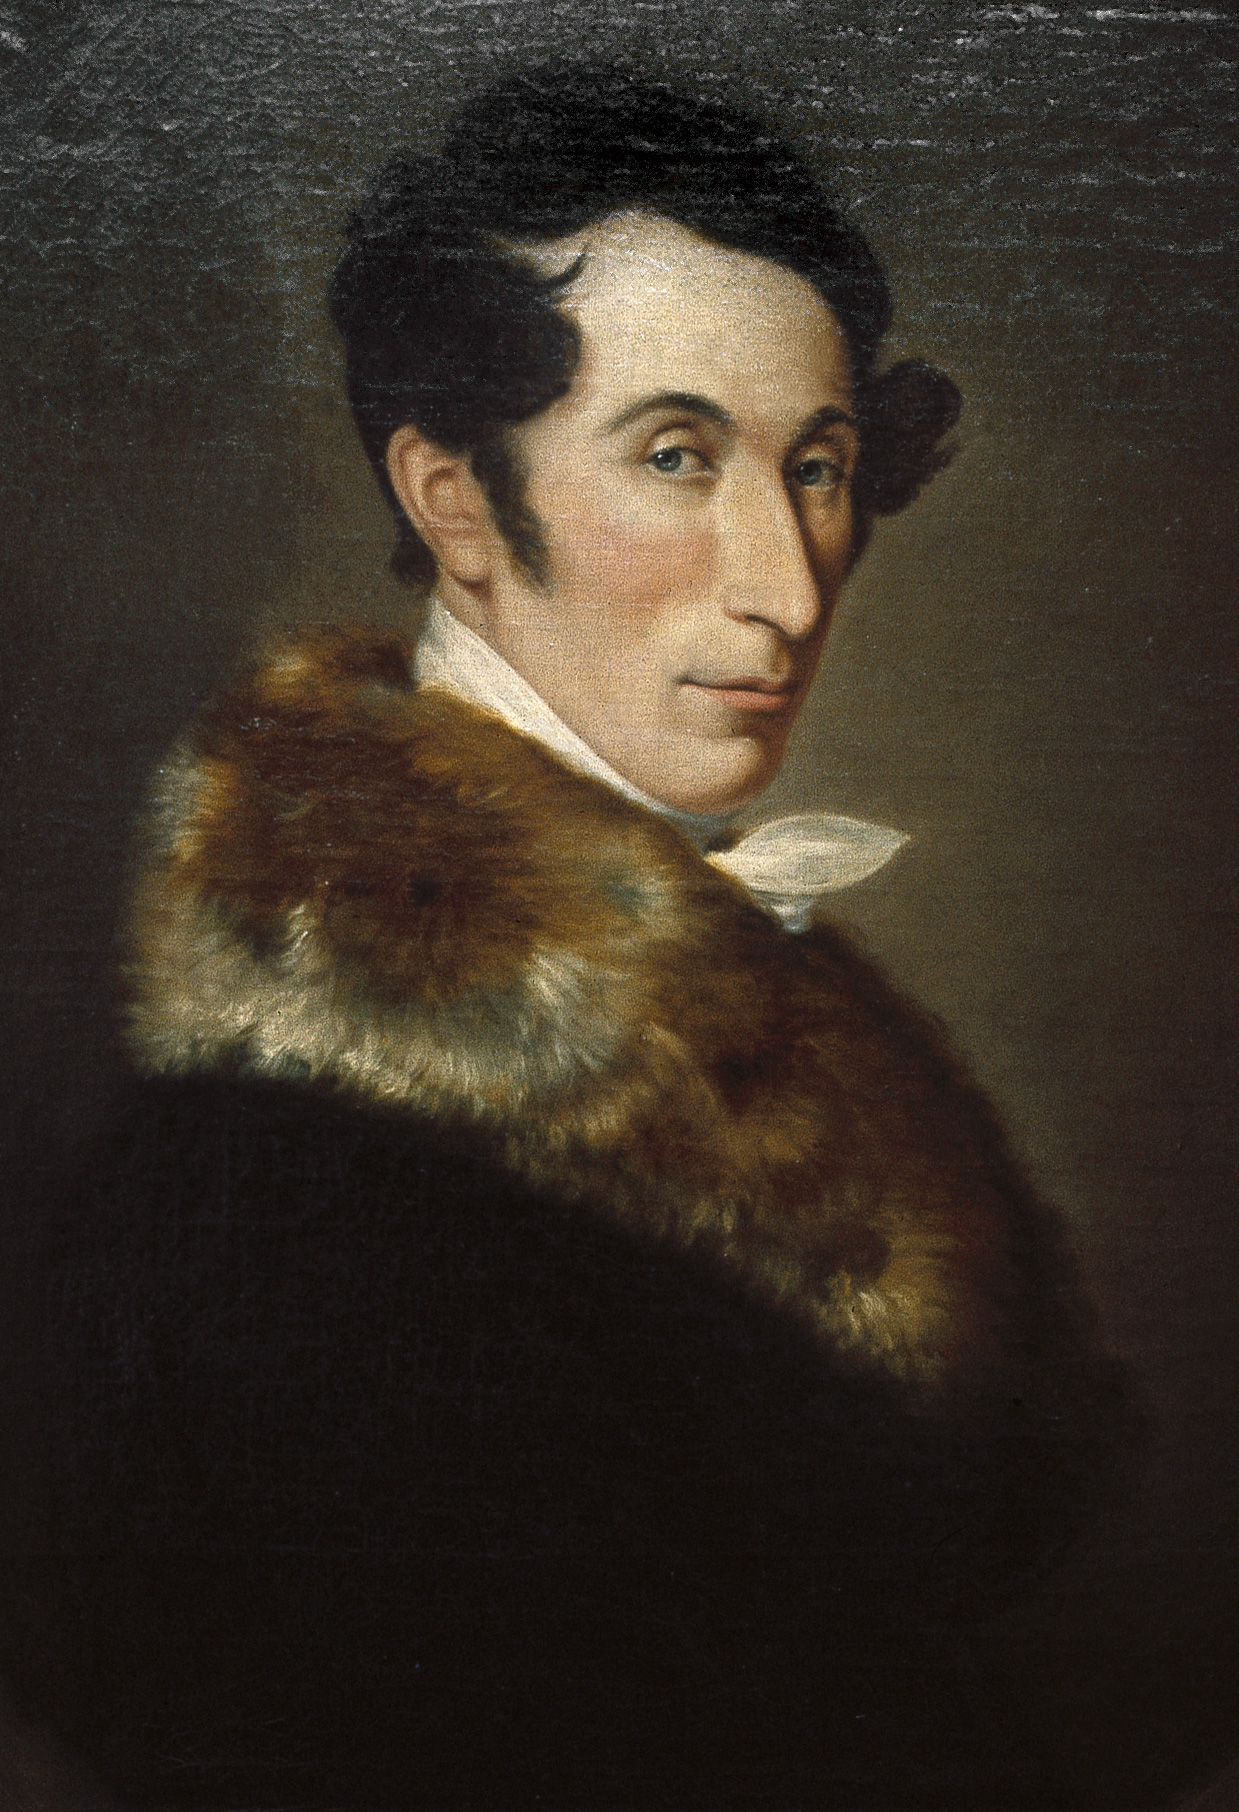 Painting: Carl Maria von Weber in a fur coat, facing the viewer.